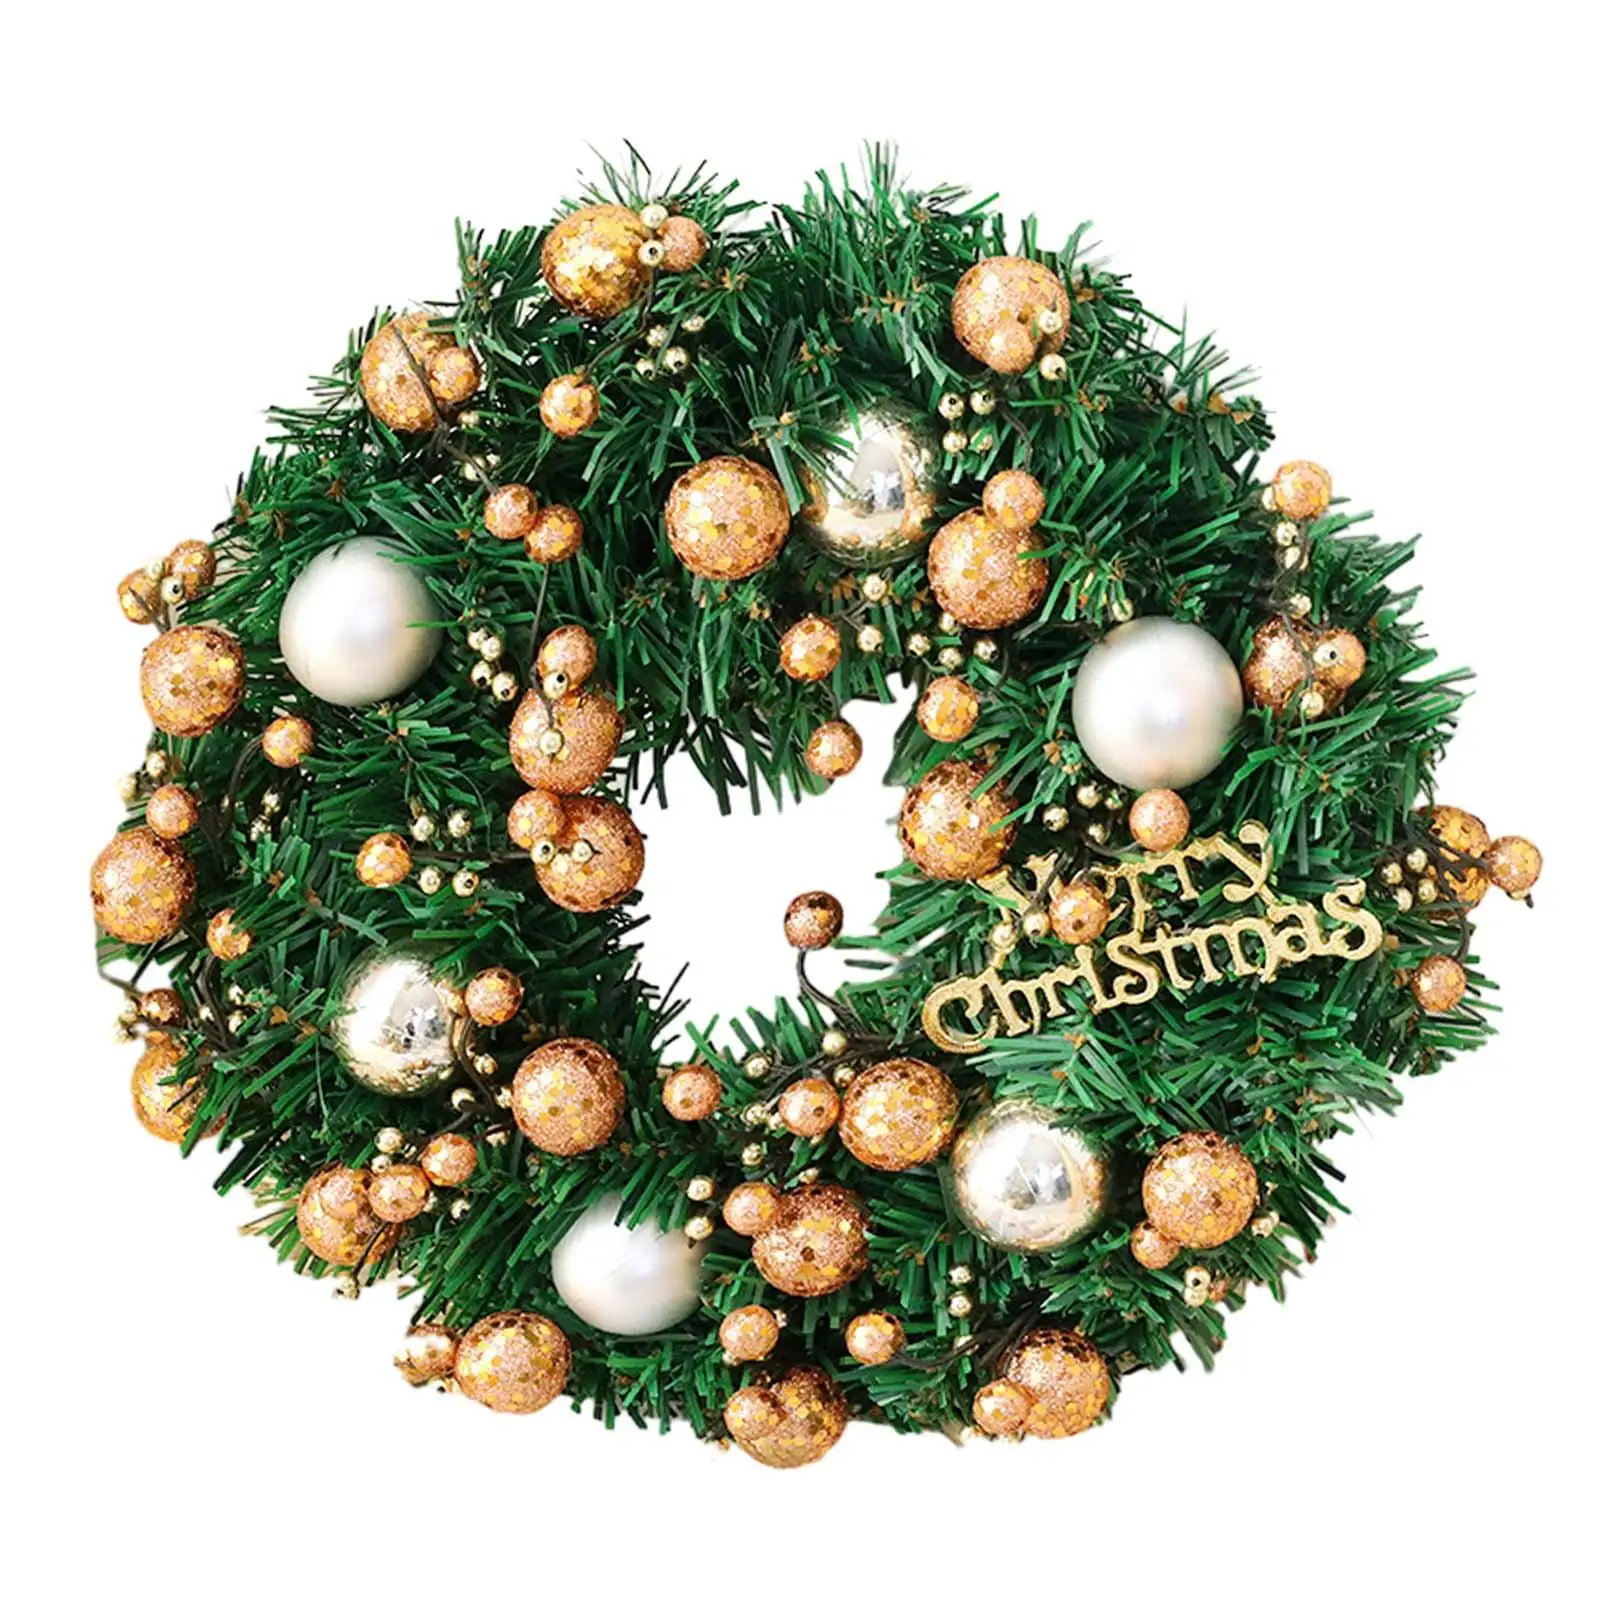 Artificial Christmas Wreath Front Door Hanging Wreath for Window Wall Porch